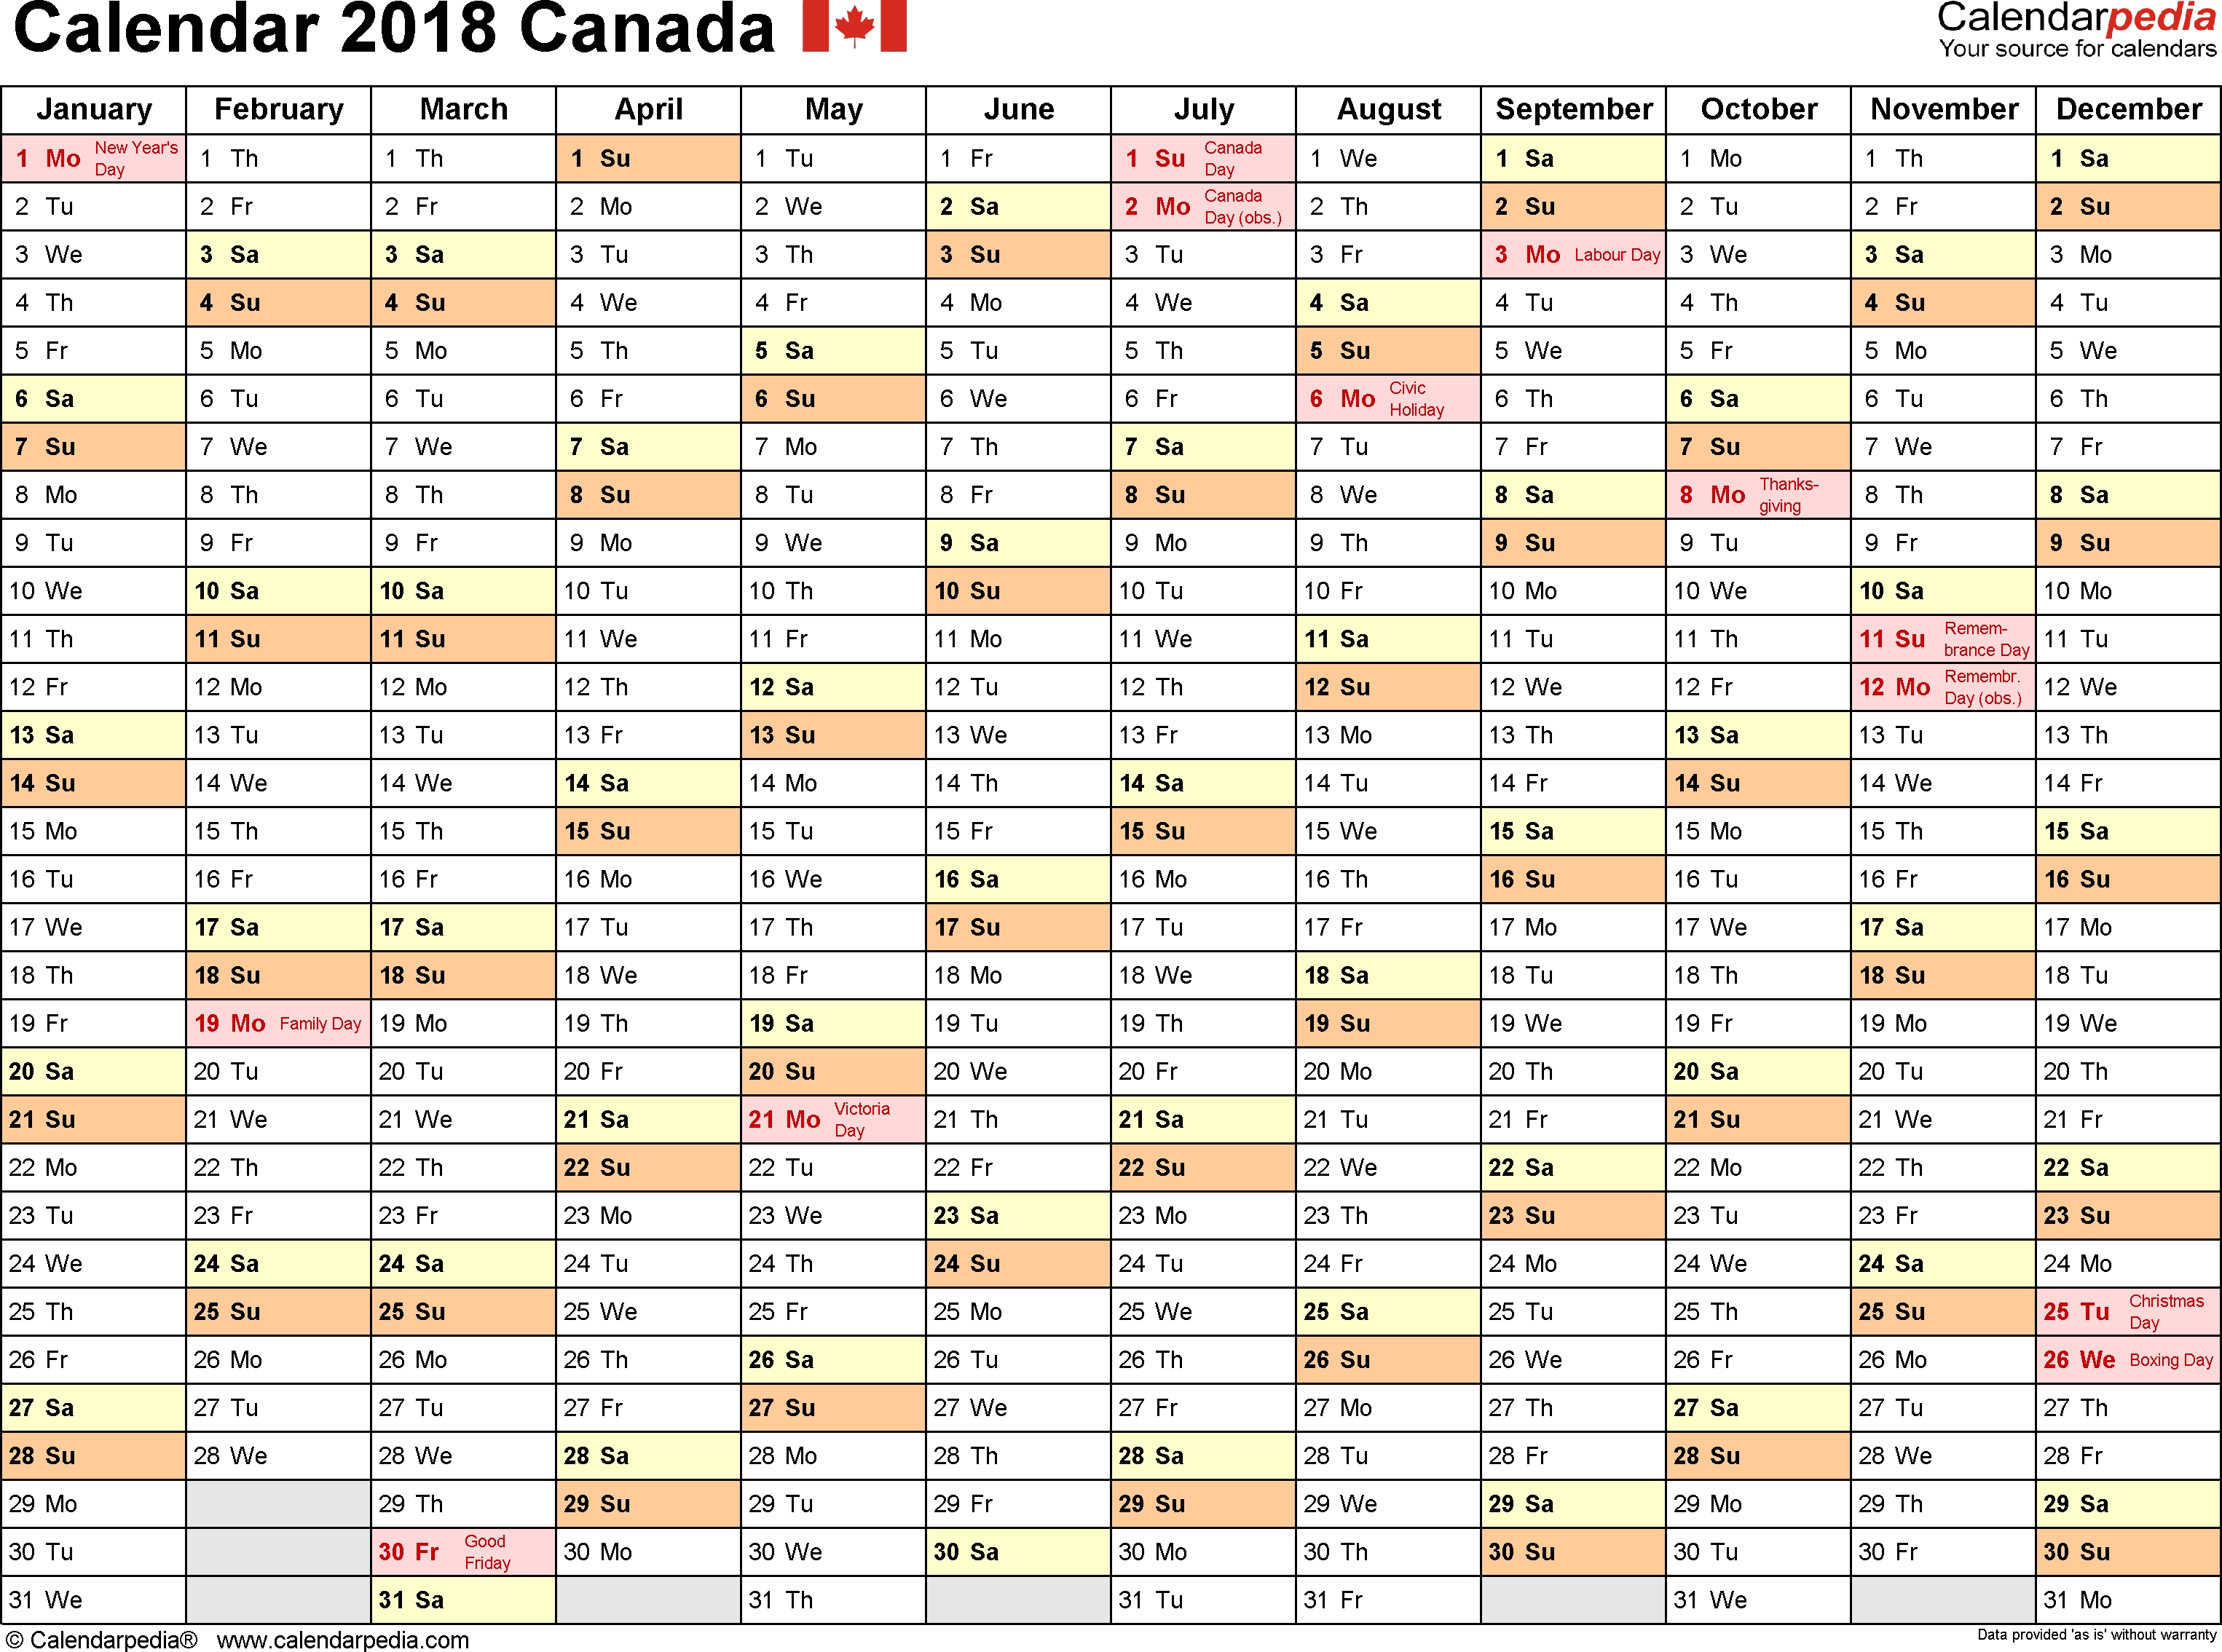 Canada Calendar 2018 - Free Printable Excel Templates in Year At A Glance Calendar - Vacation Schedule For Staff